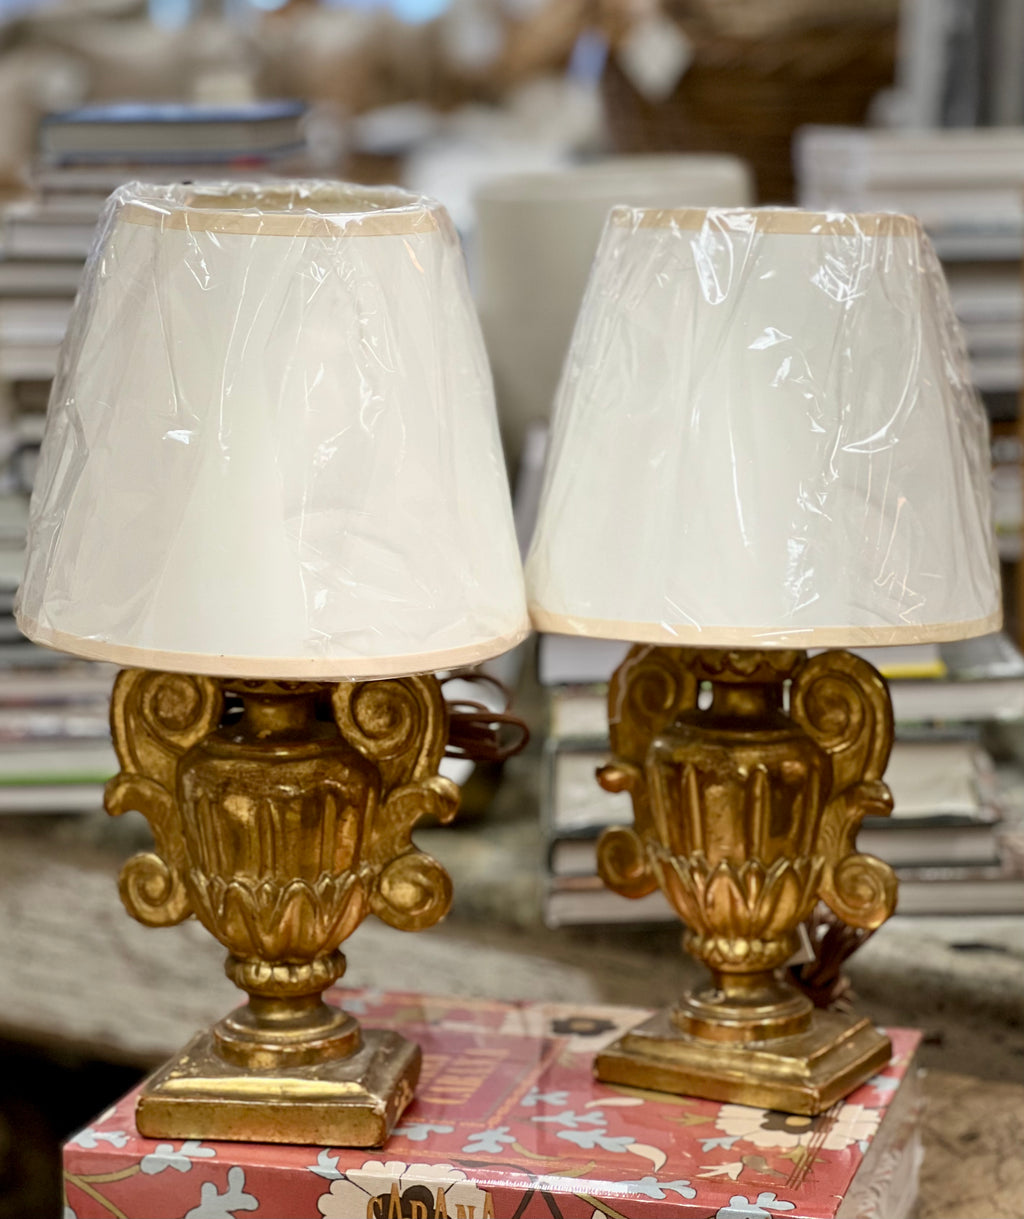 Pair of Gilt Urns made into Lamps ~ Early 19th Century Italian